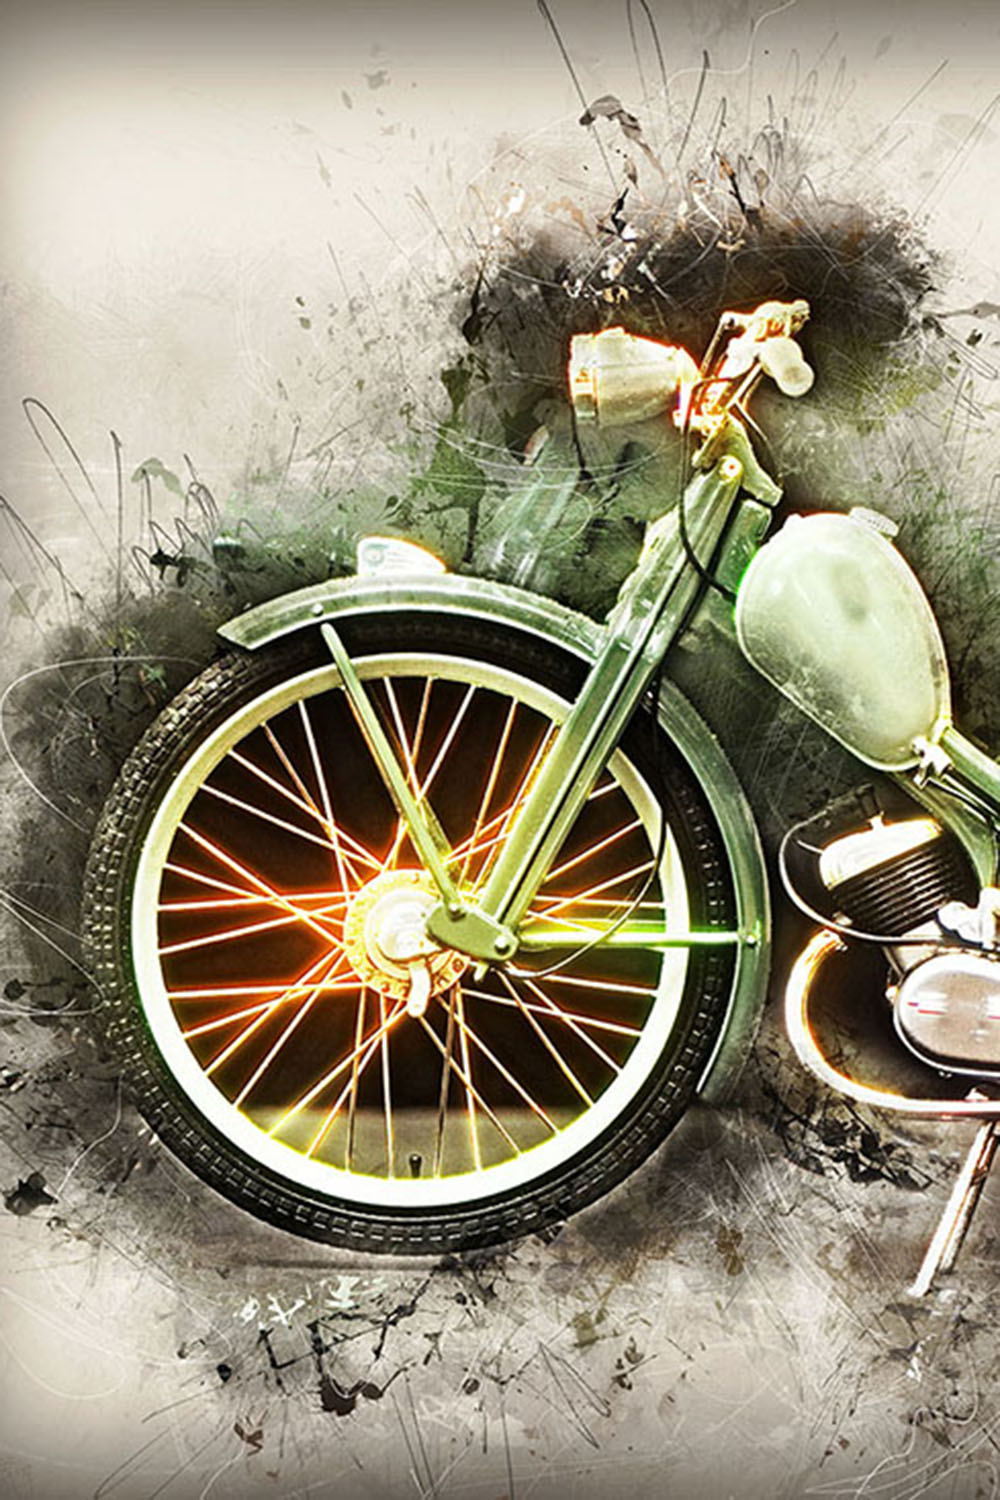 Motorcycles HQ Graphics with Grunge Style Pinterest image.